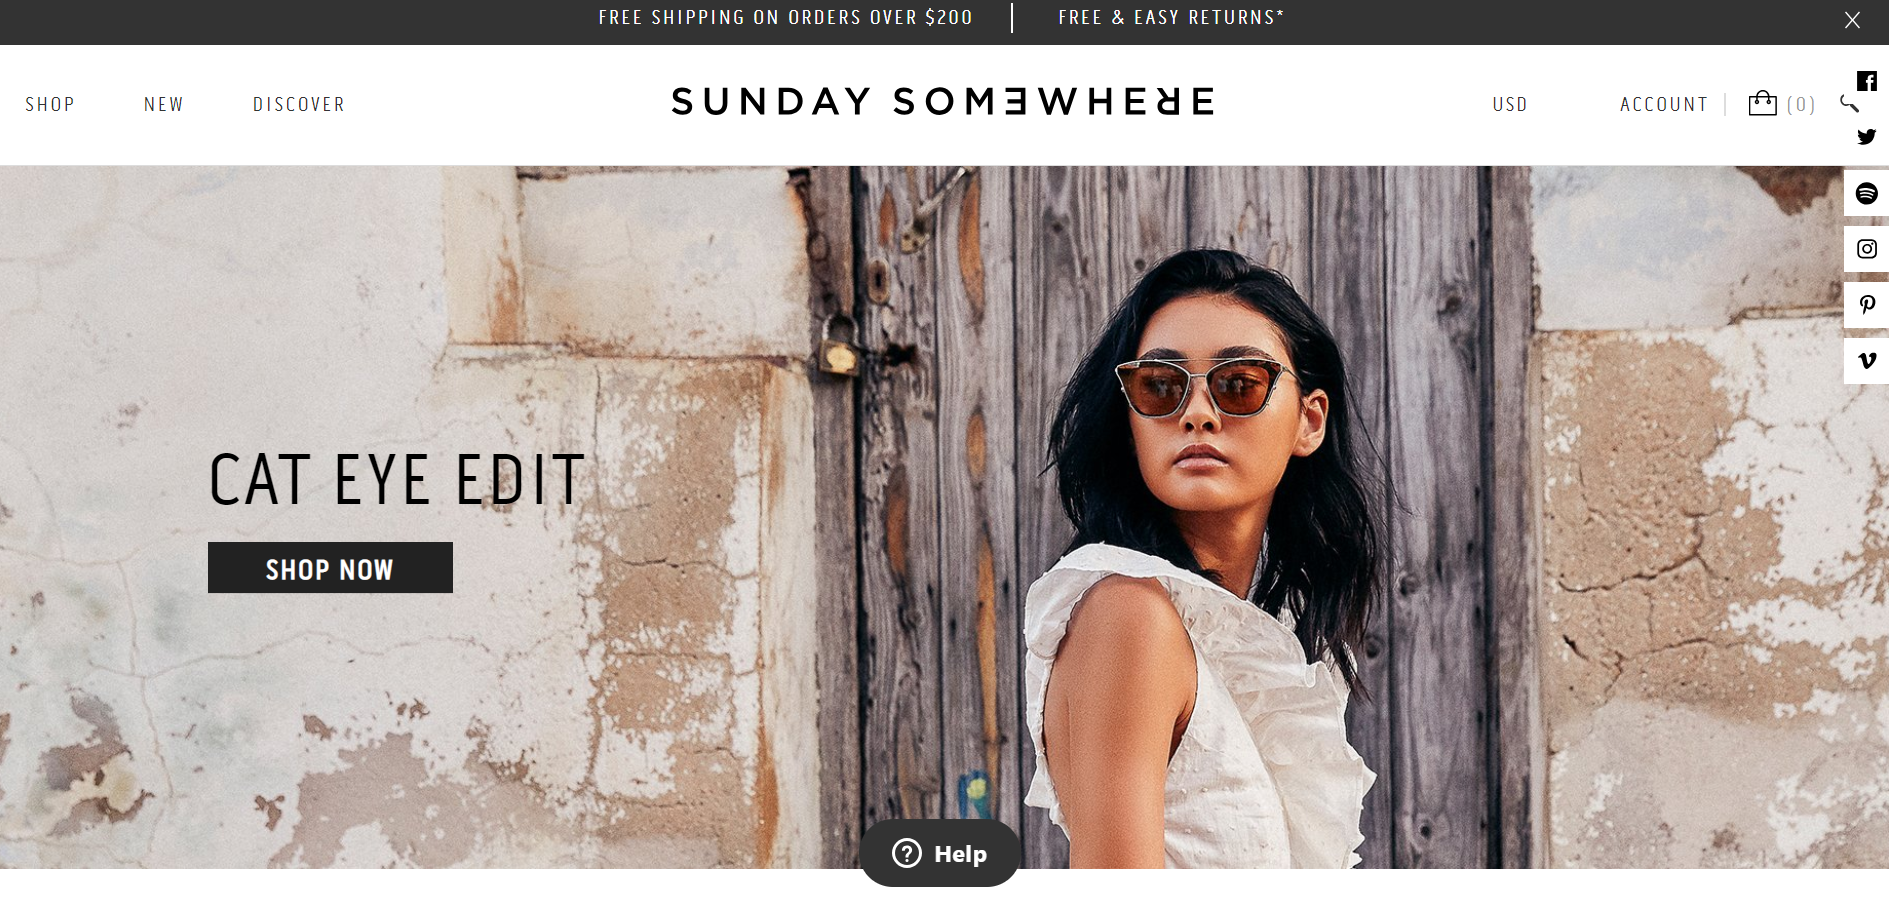 A screenshot of Sunday Somewhere's ecommerce store homepage.